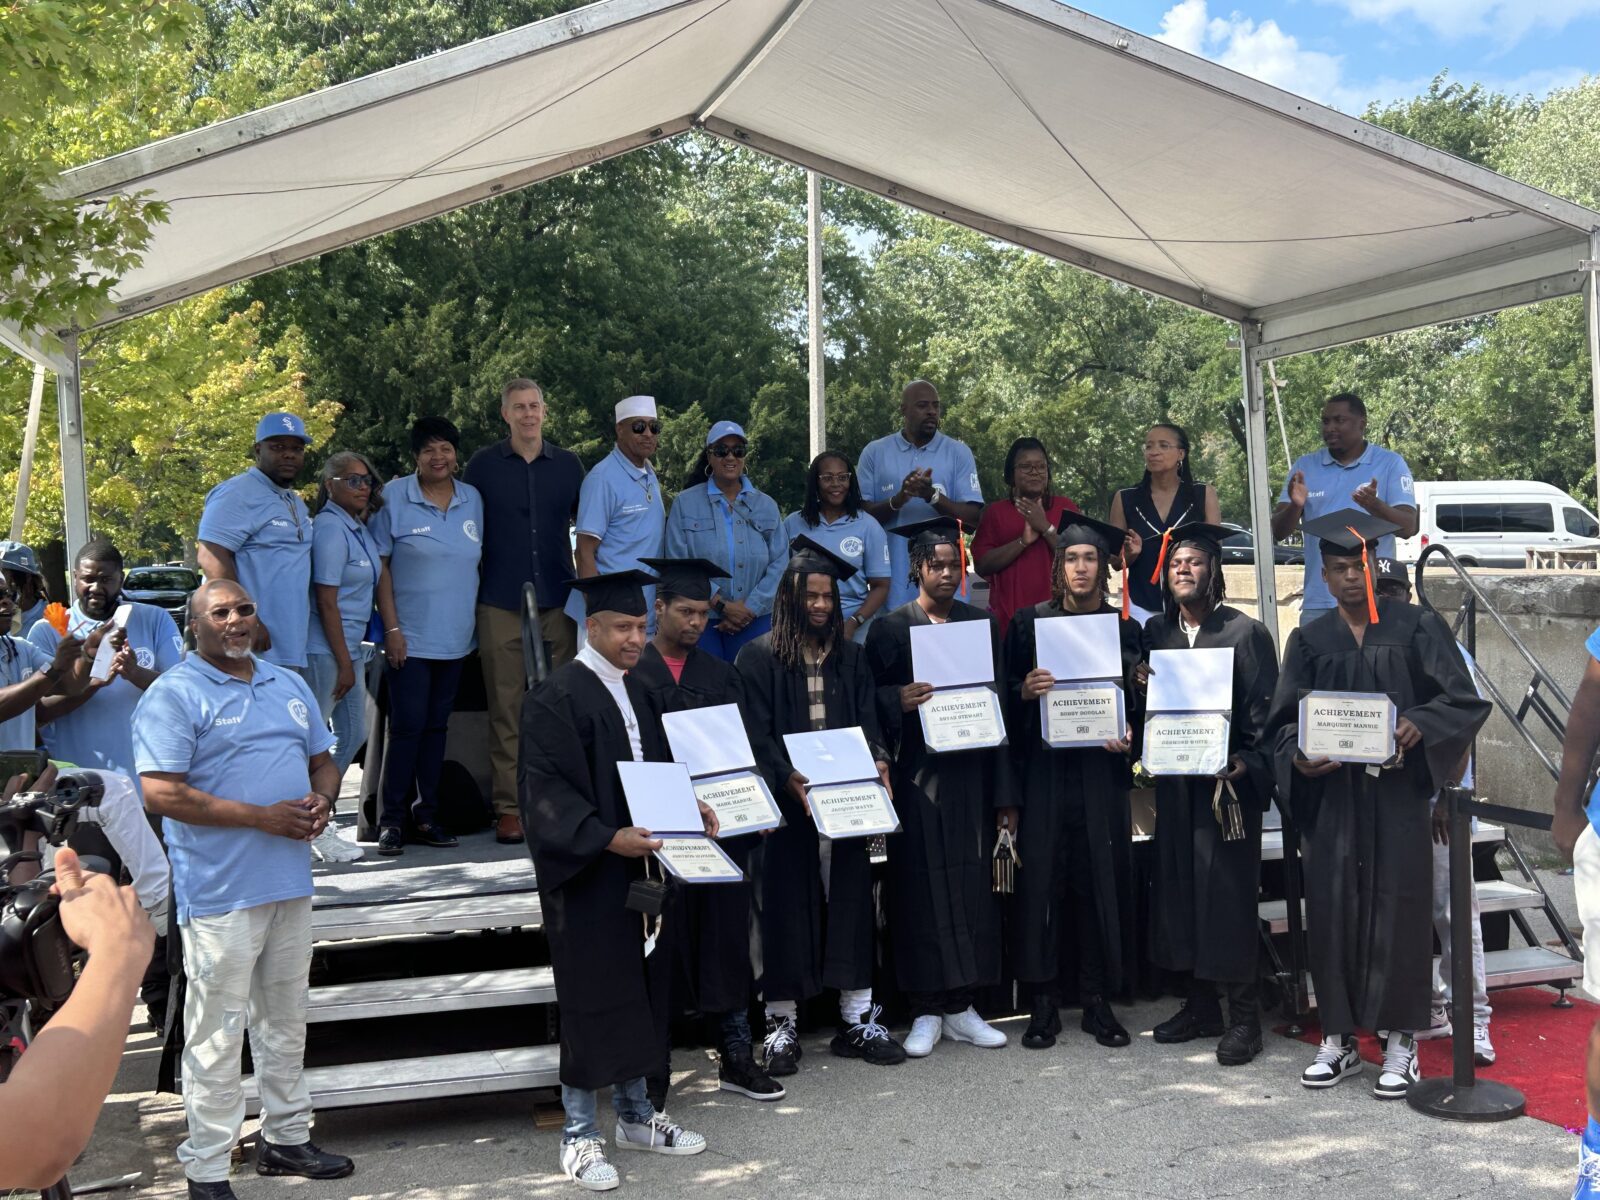 86 Chicago CRED Participants Earn High School Diplomas  7th High School Graduation Brings the Total up to 322